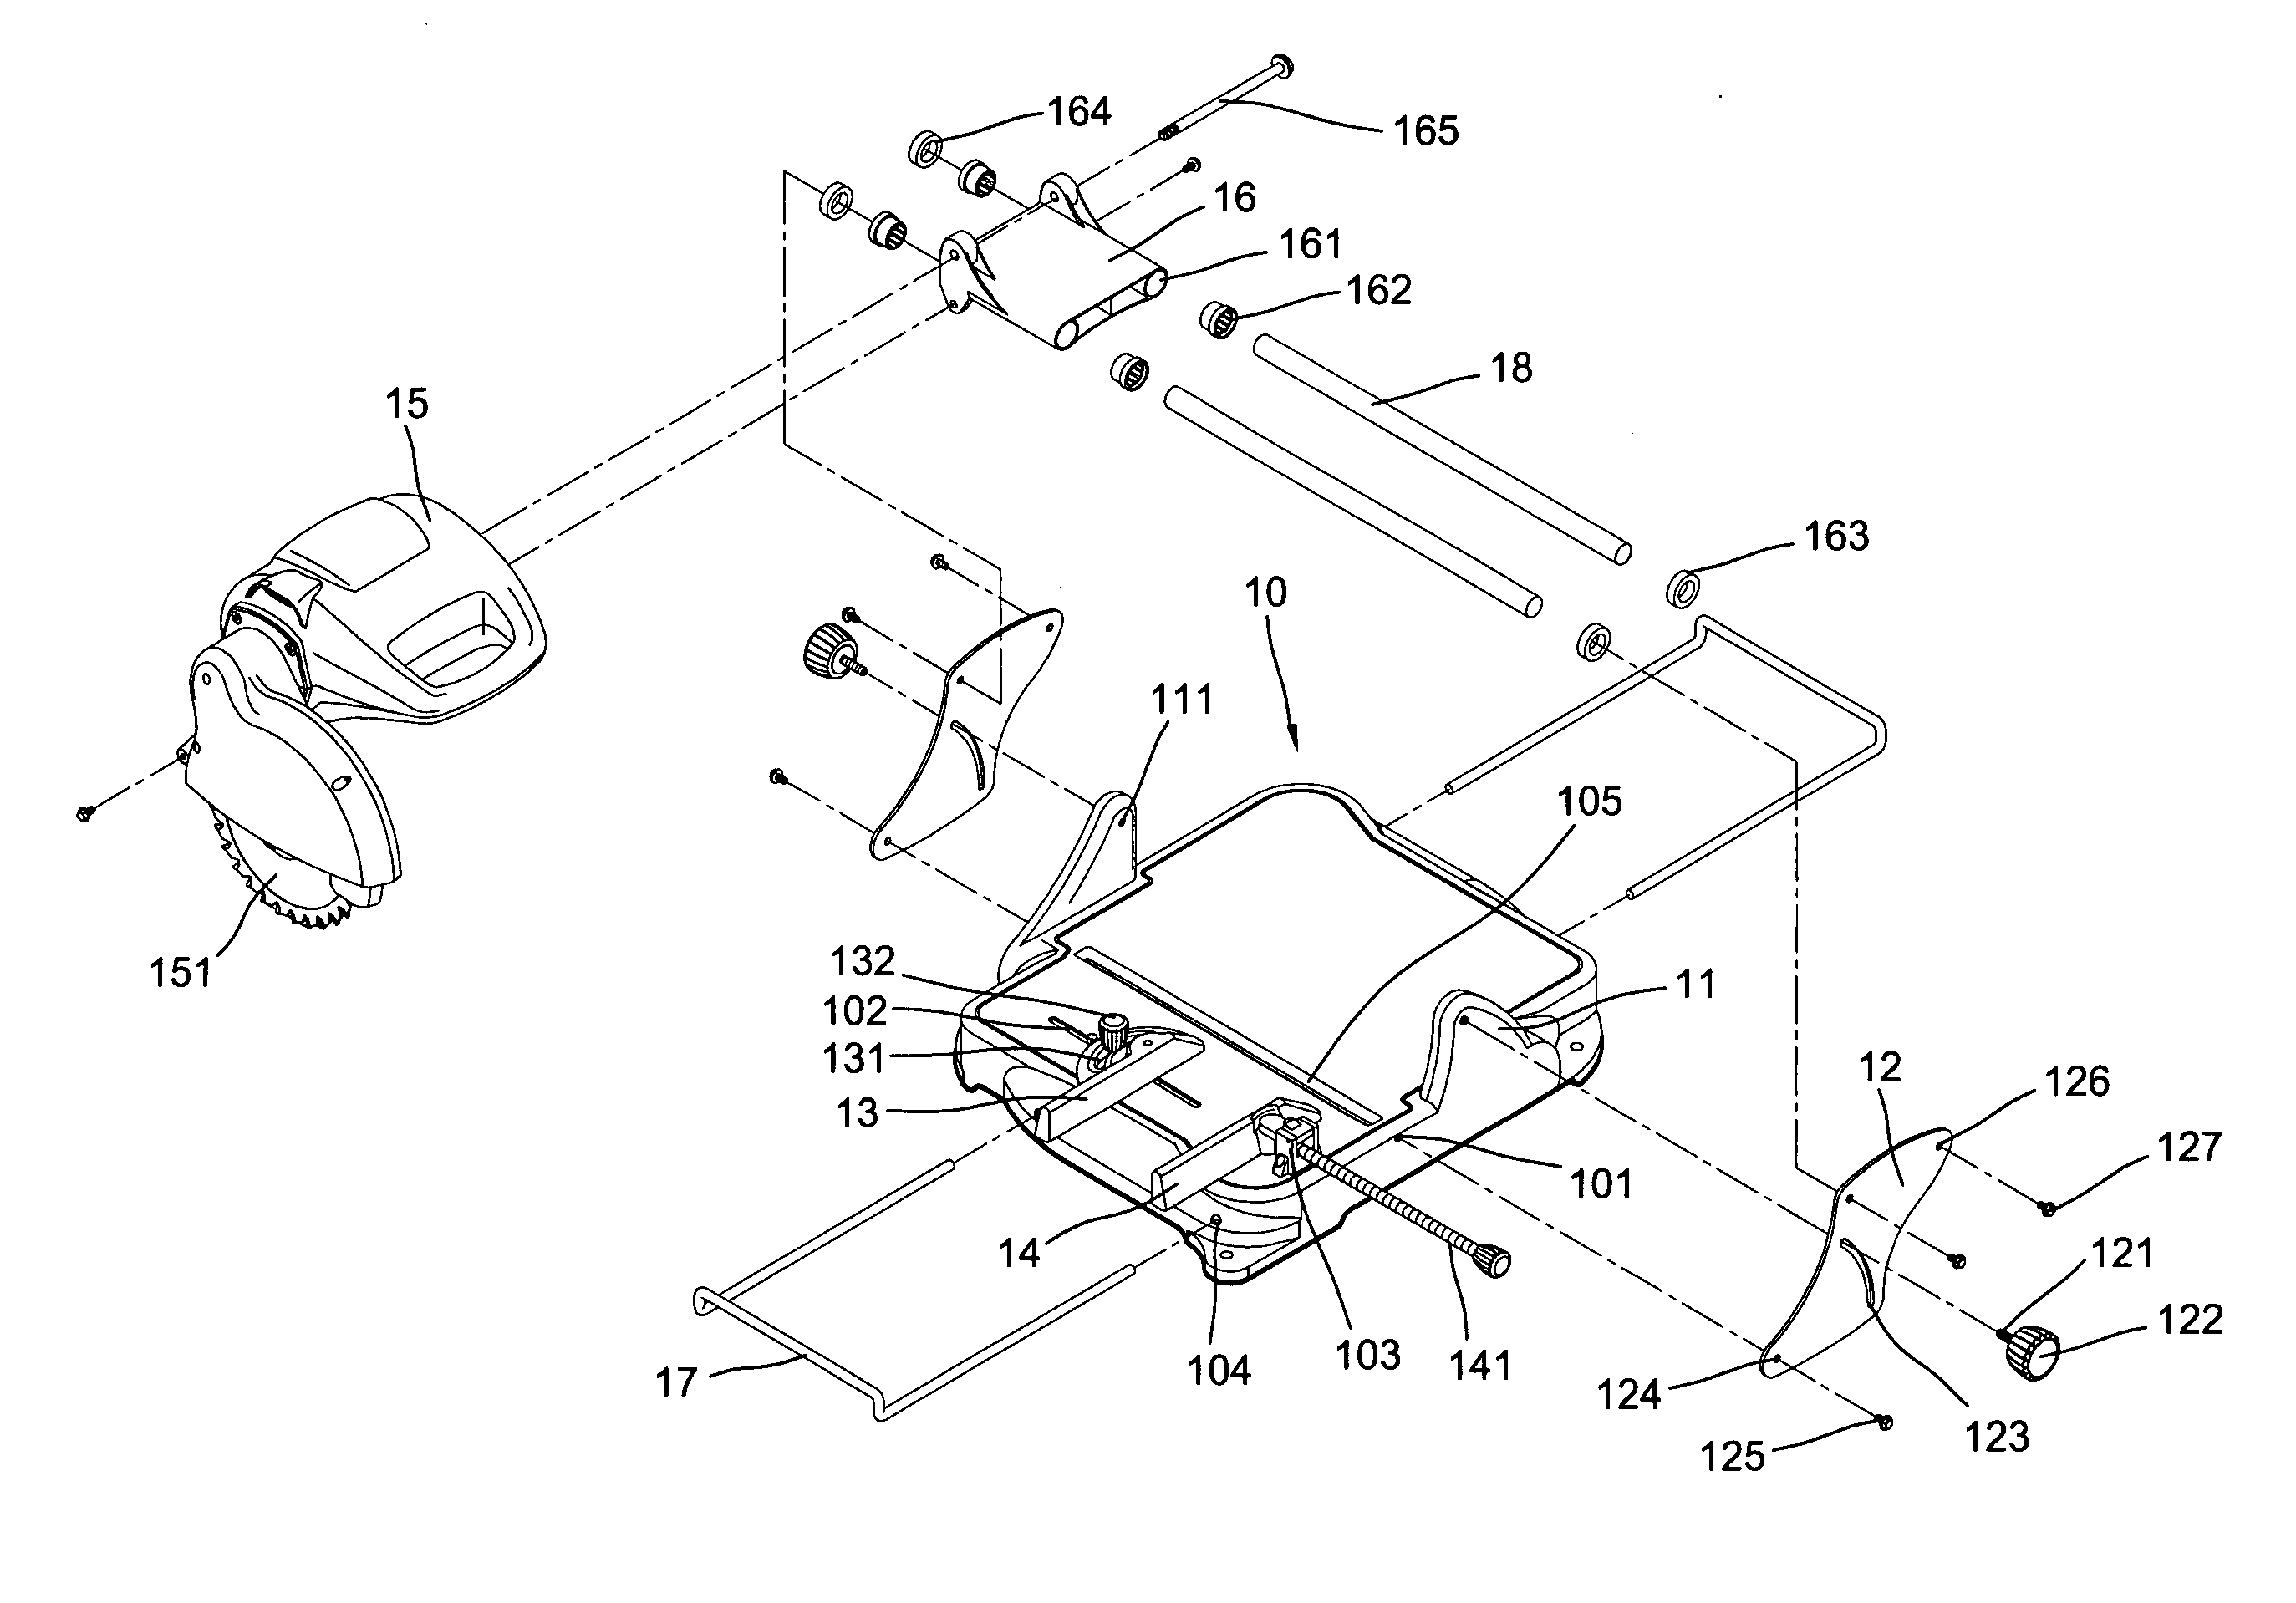 Saw blade angular adjustment device for a metal and wood cutting machine